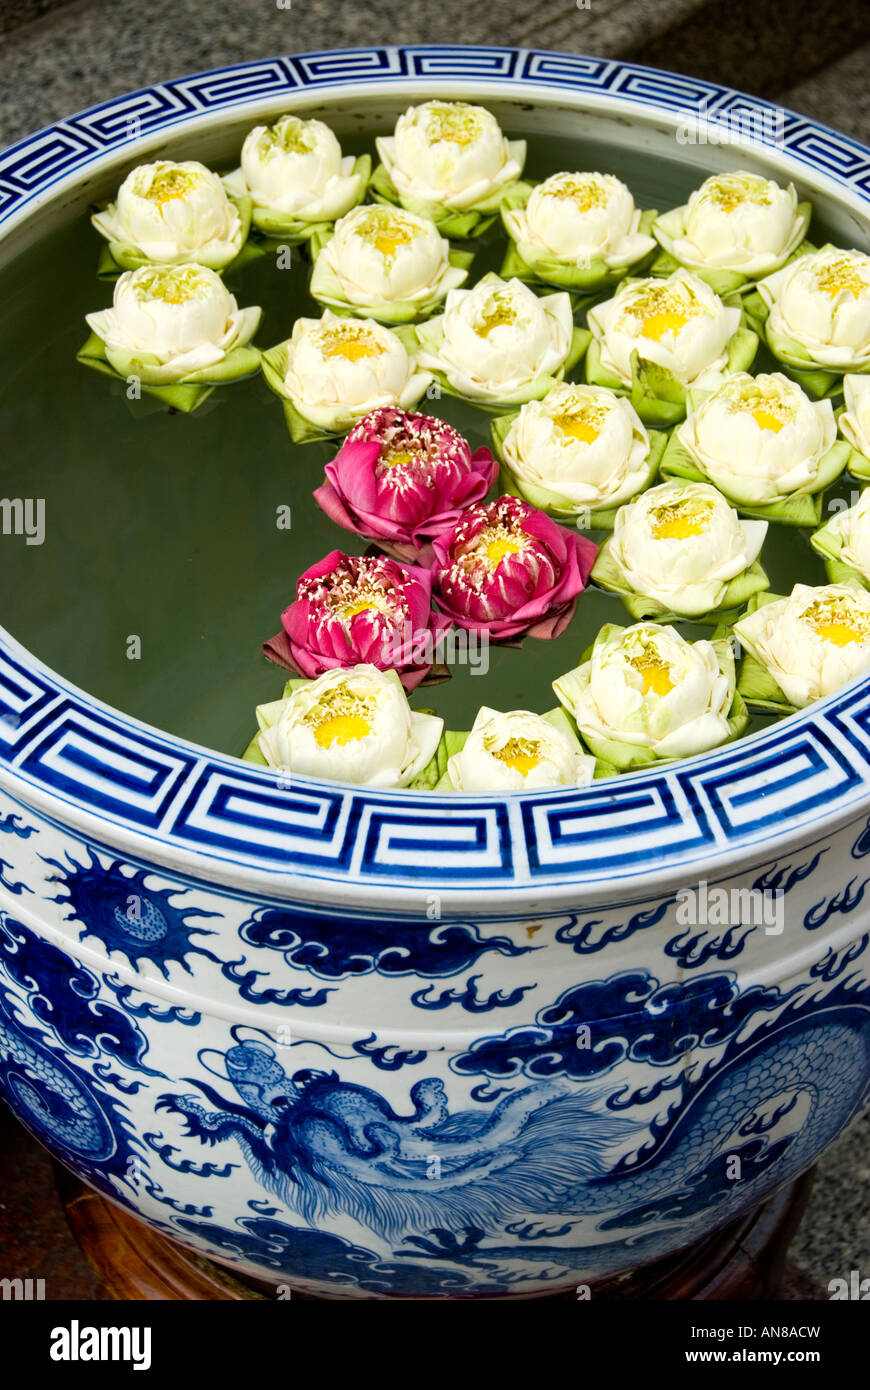 Lotus buds in a porcelain vase Stock Photo